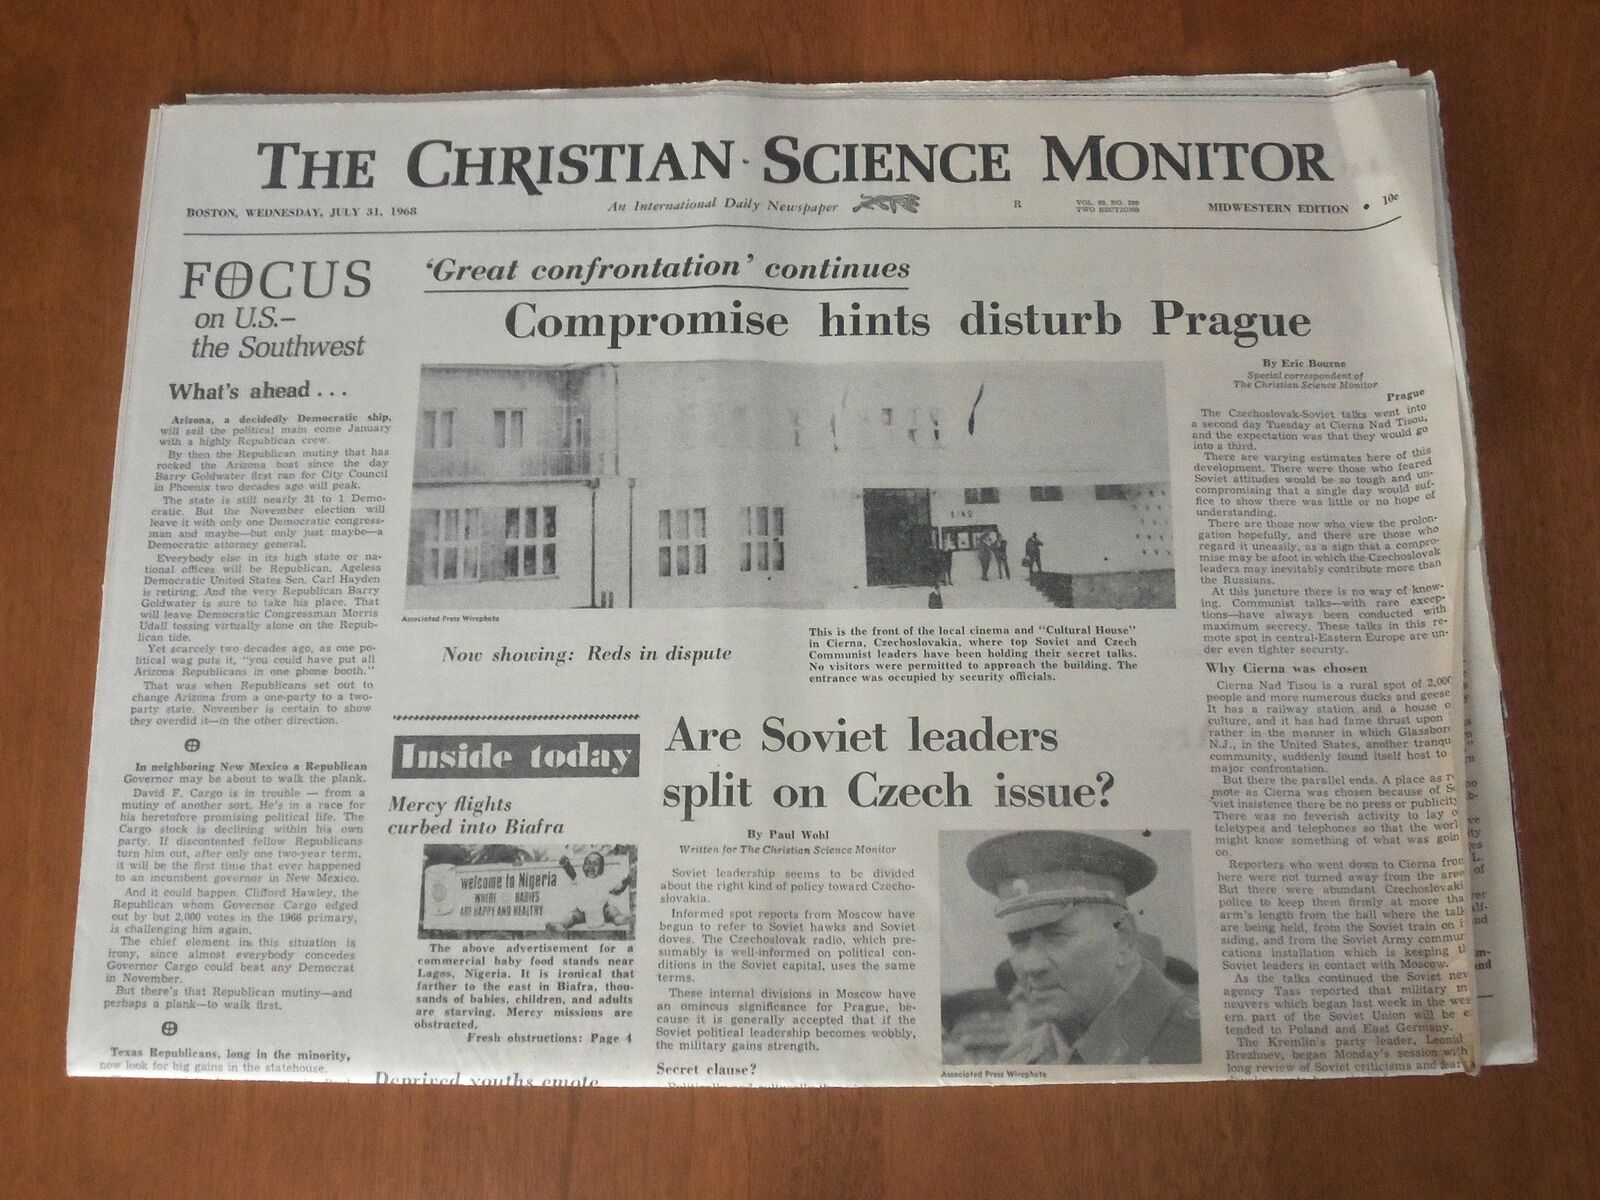 1968 JULY 31 THE CHRISTIAN SCIENCE MONITOR -NORTH VIETNAM 50% PULLBACK - NP 4669